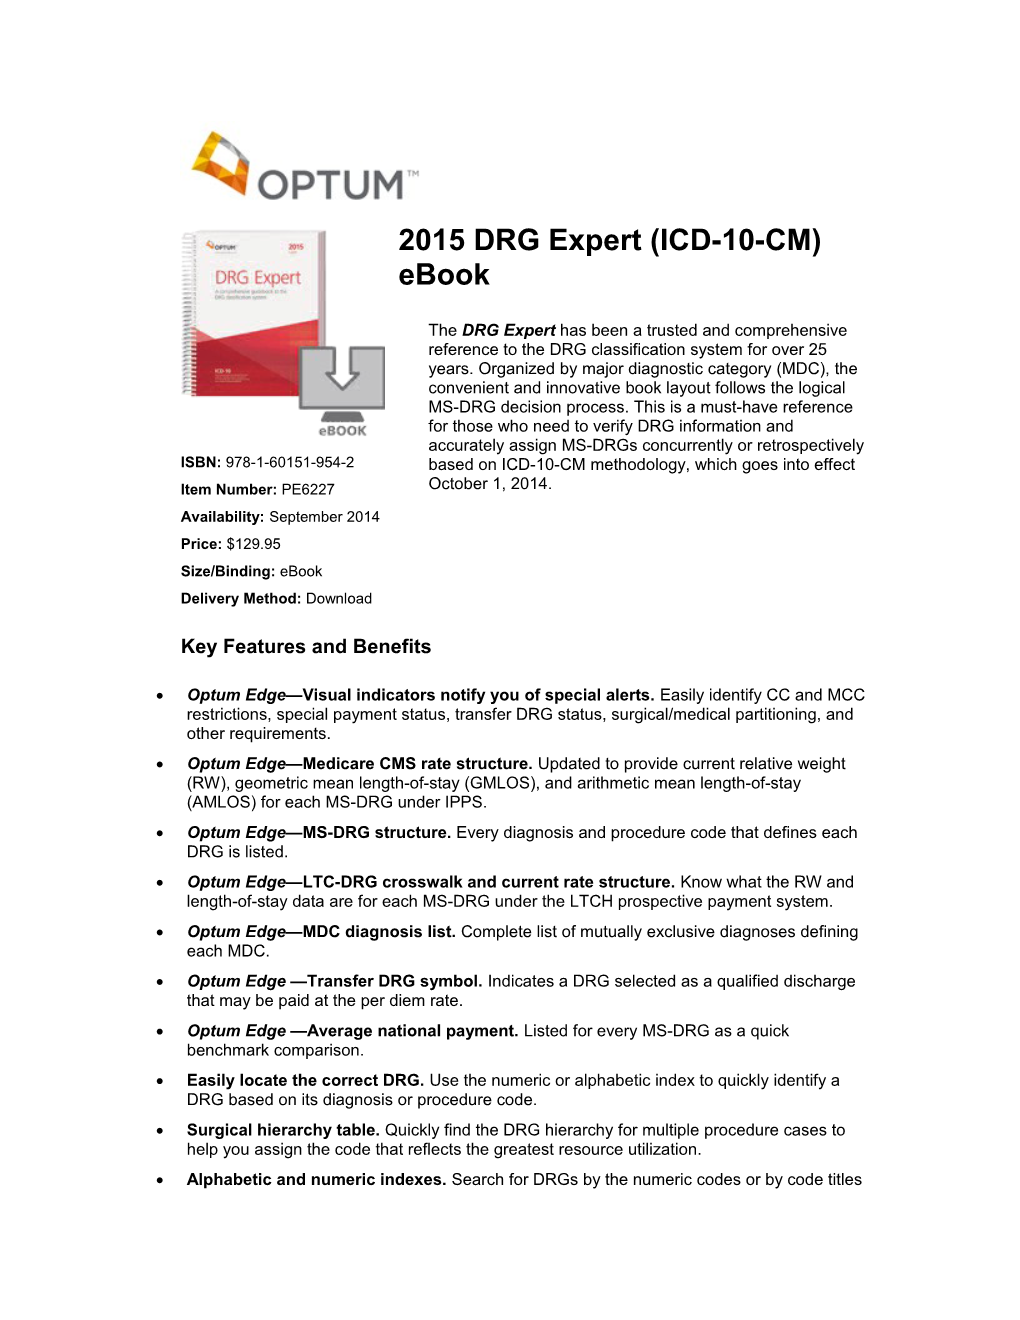 Optum Edge Visual Indicators Notify You of Special Alerts. Easily Identify CC and MCC